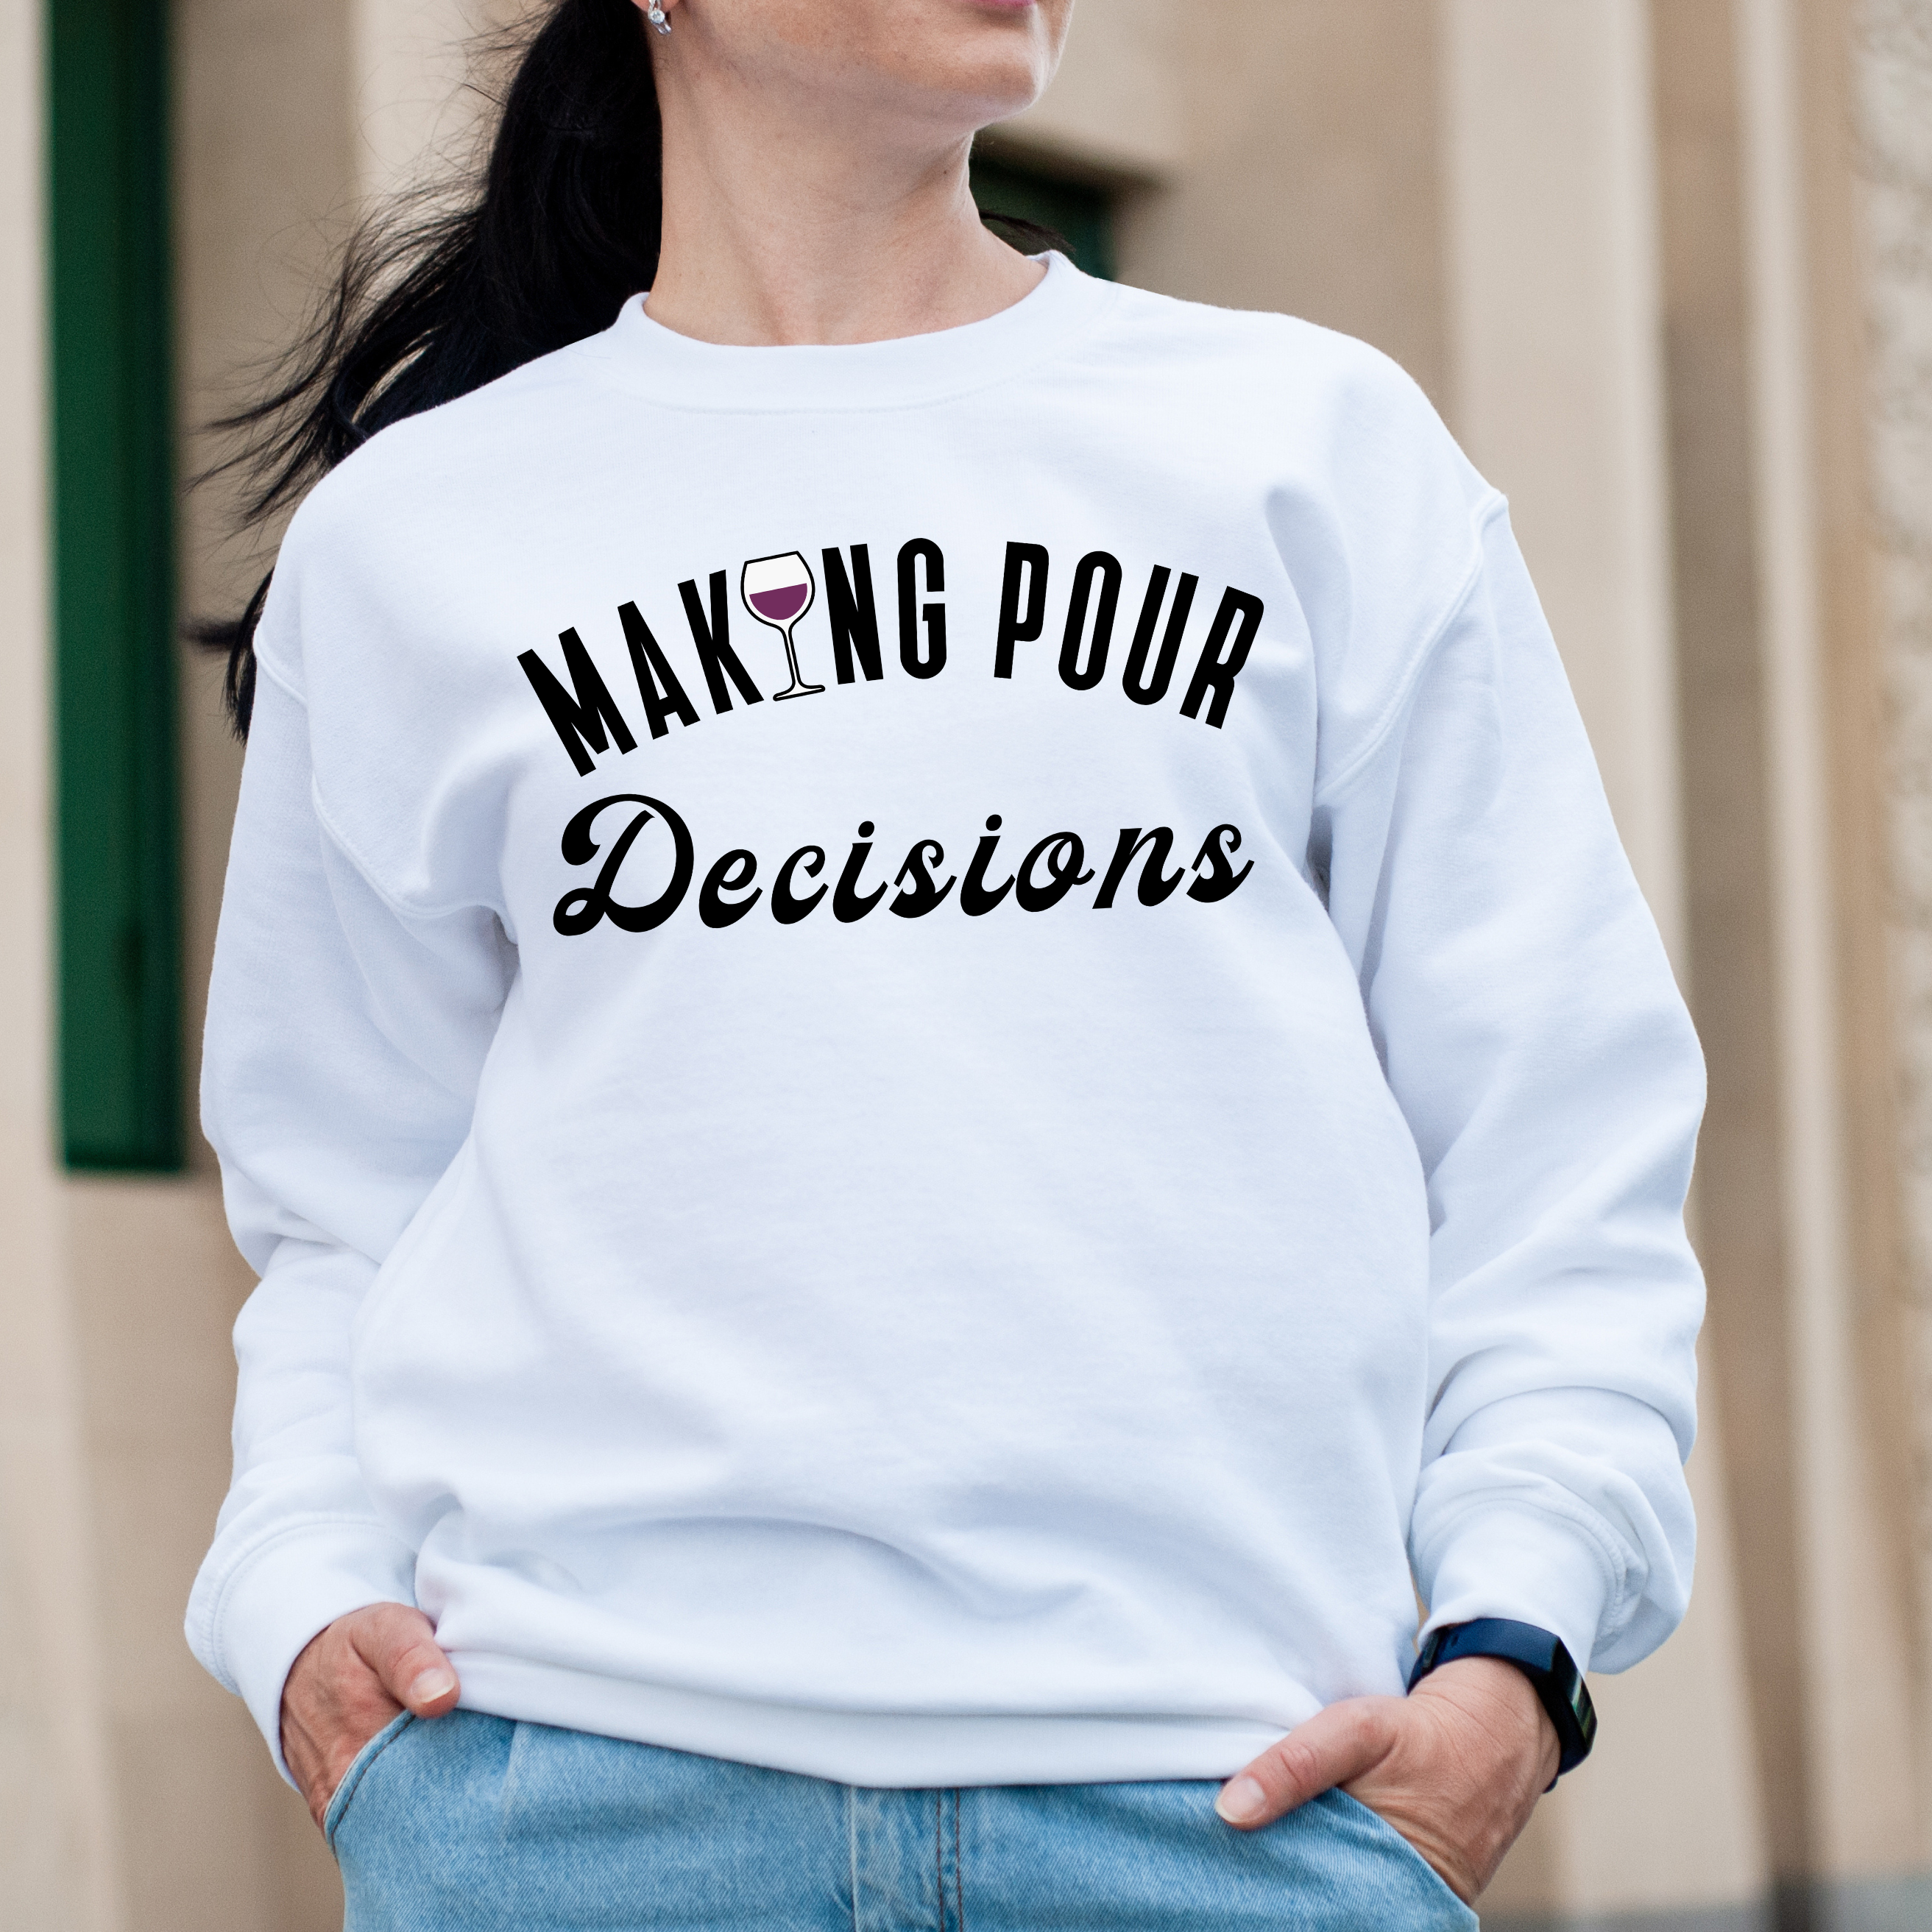 Making Pour Decisions Crewneck Sweatshirt in White with black text on female model mock-up